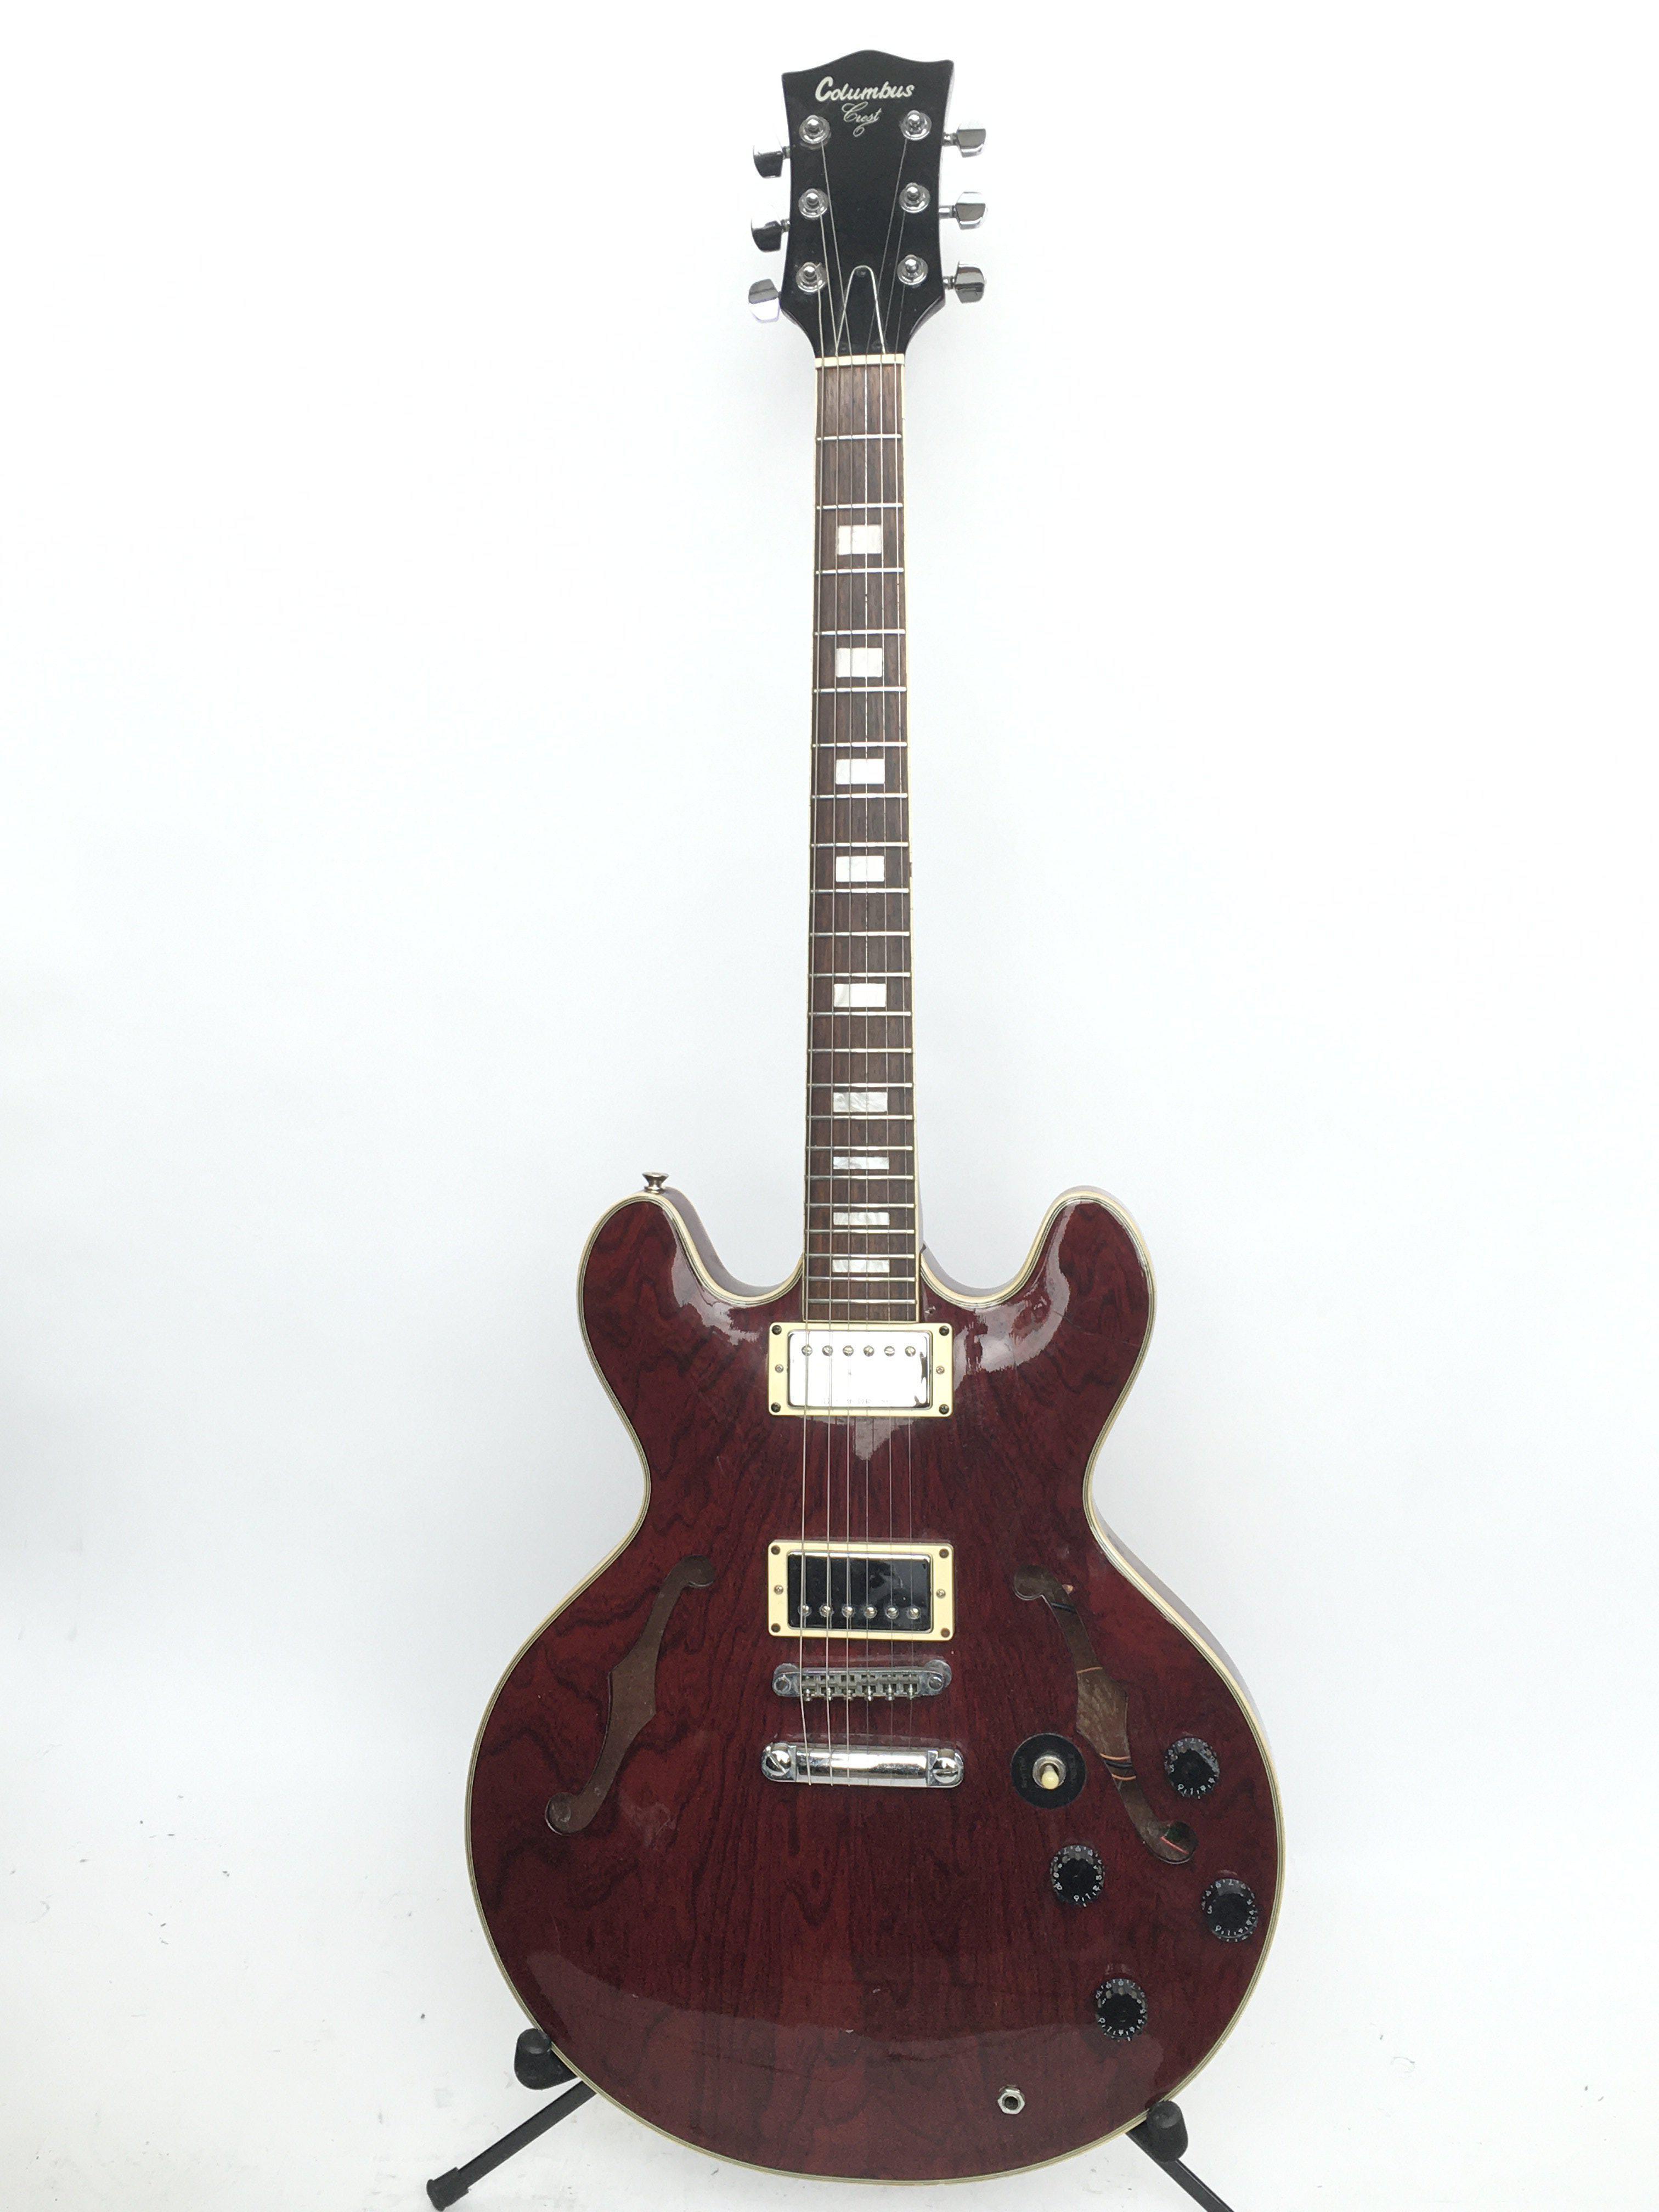 A Columbus 335 style electric guitar in wine red.